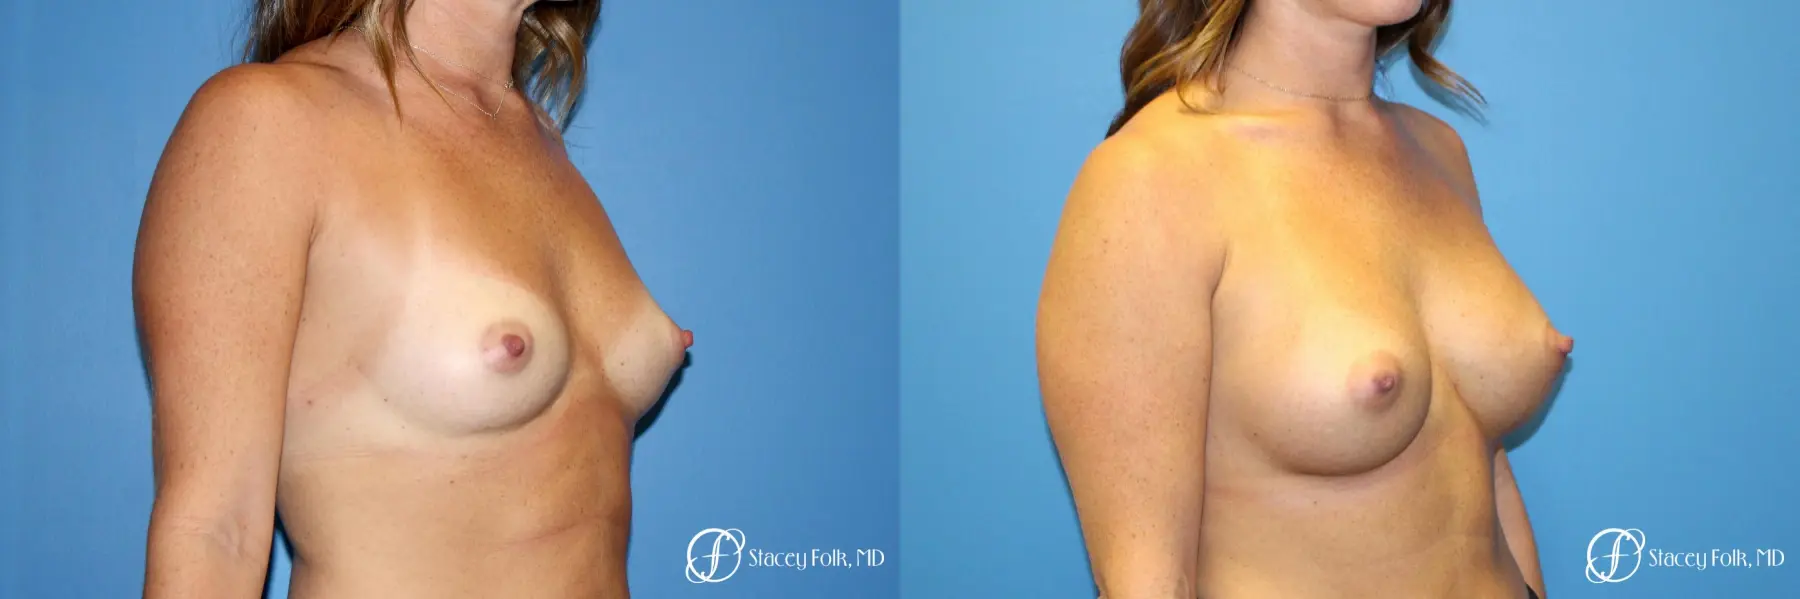 Denver Breast Augmentation using Sientra Silicone Breast Implants 9092 - Before and After 2